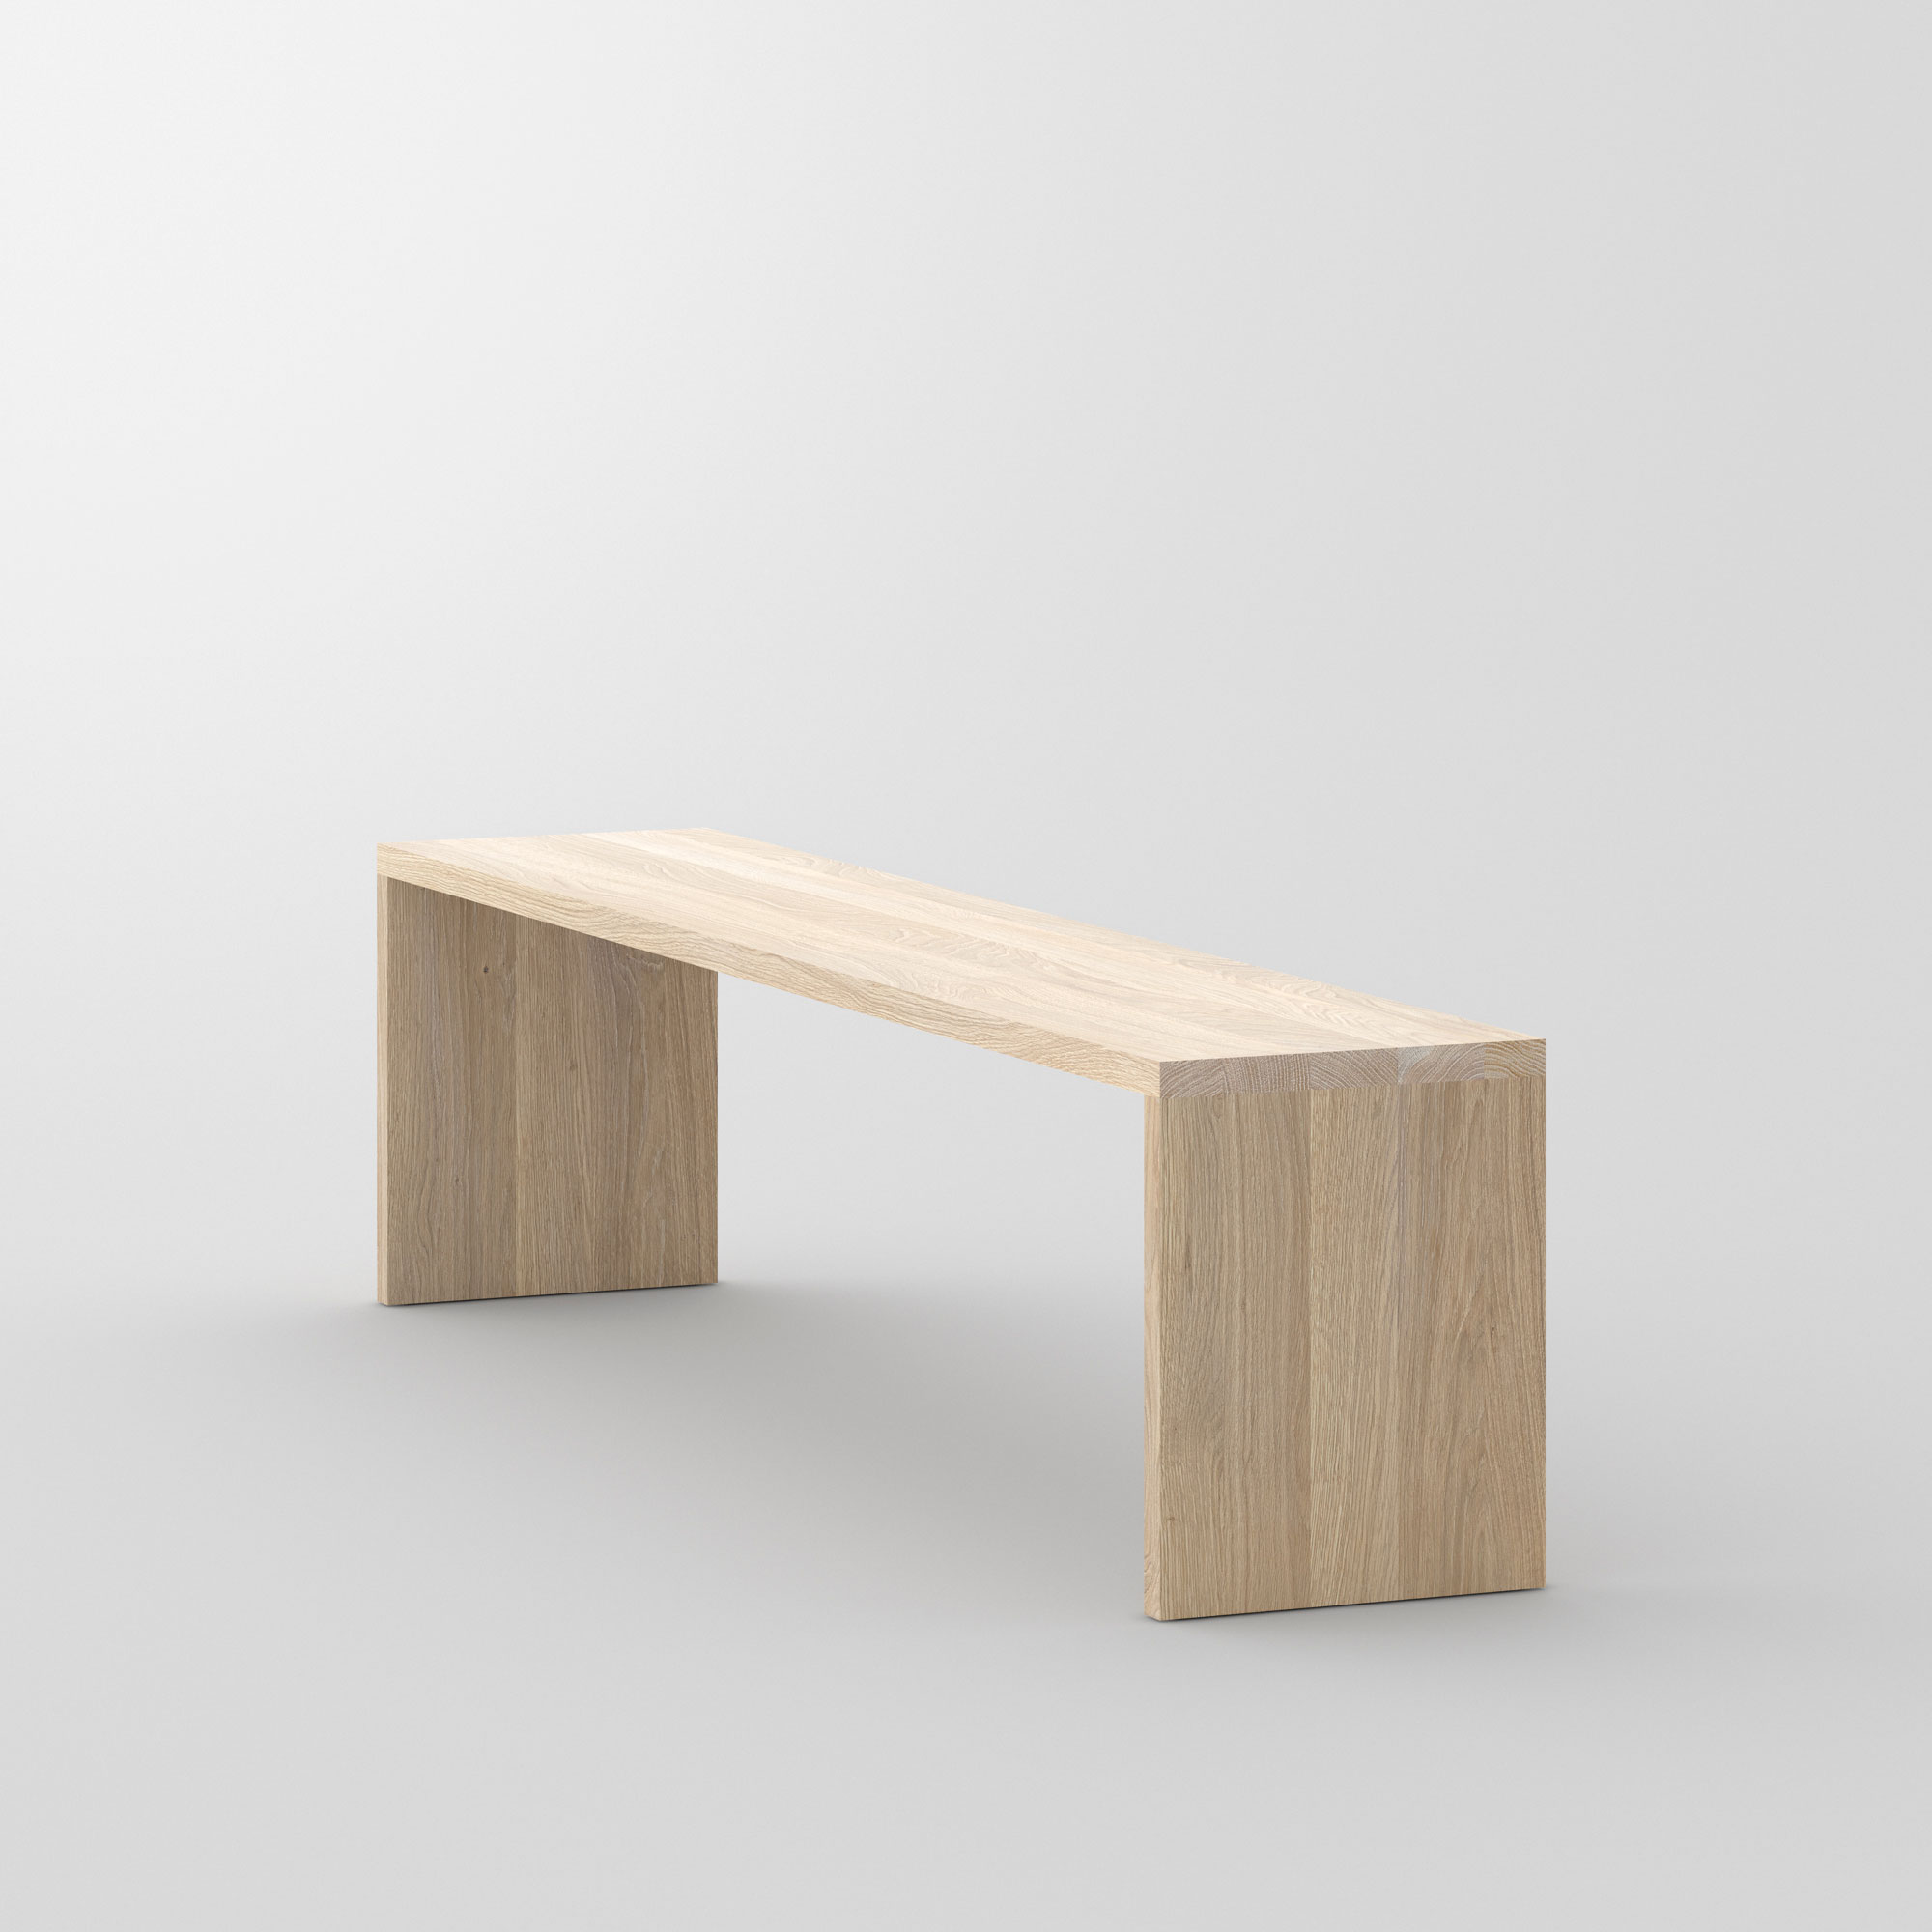 Solid Wood Bench MENA 3 cam3 custom made in solid wood by vitamin design